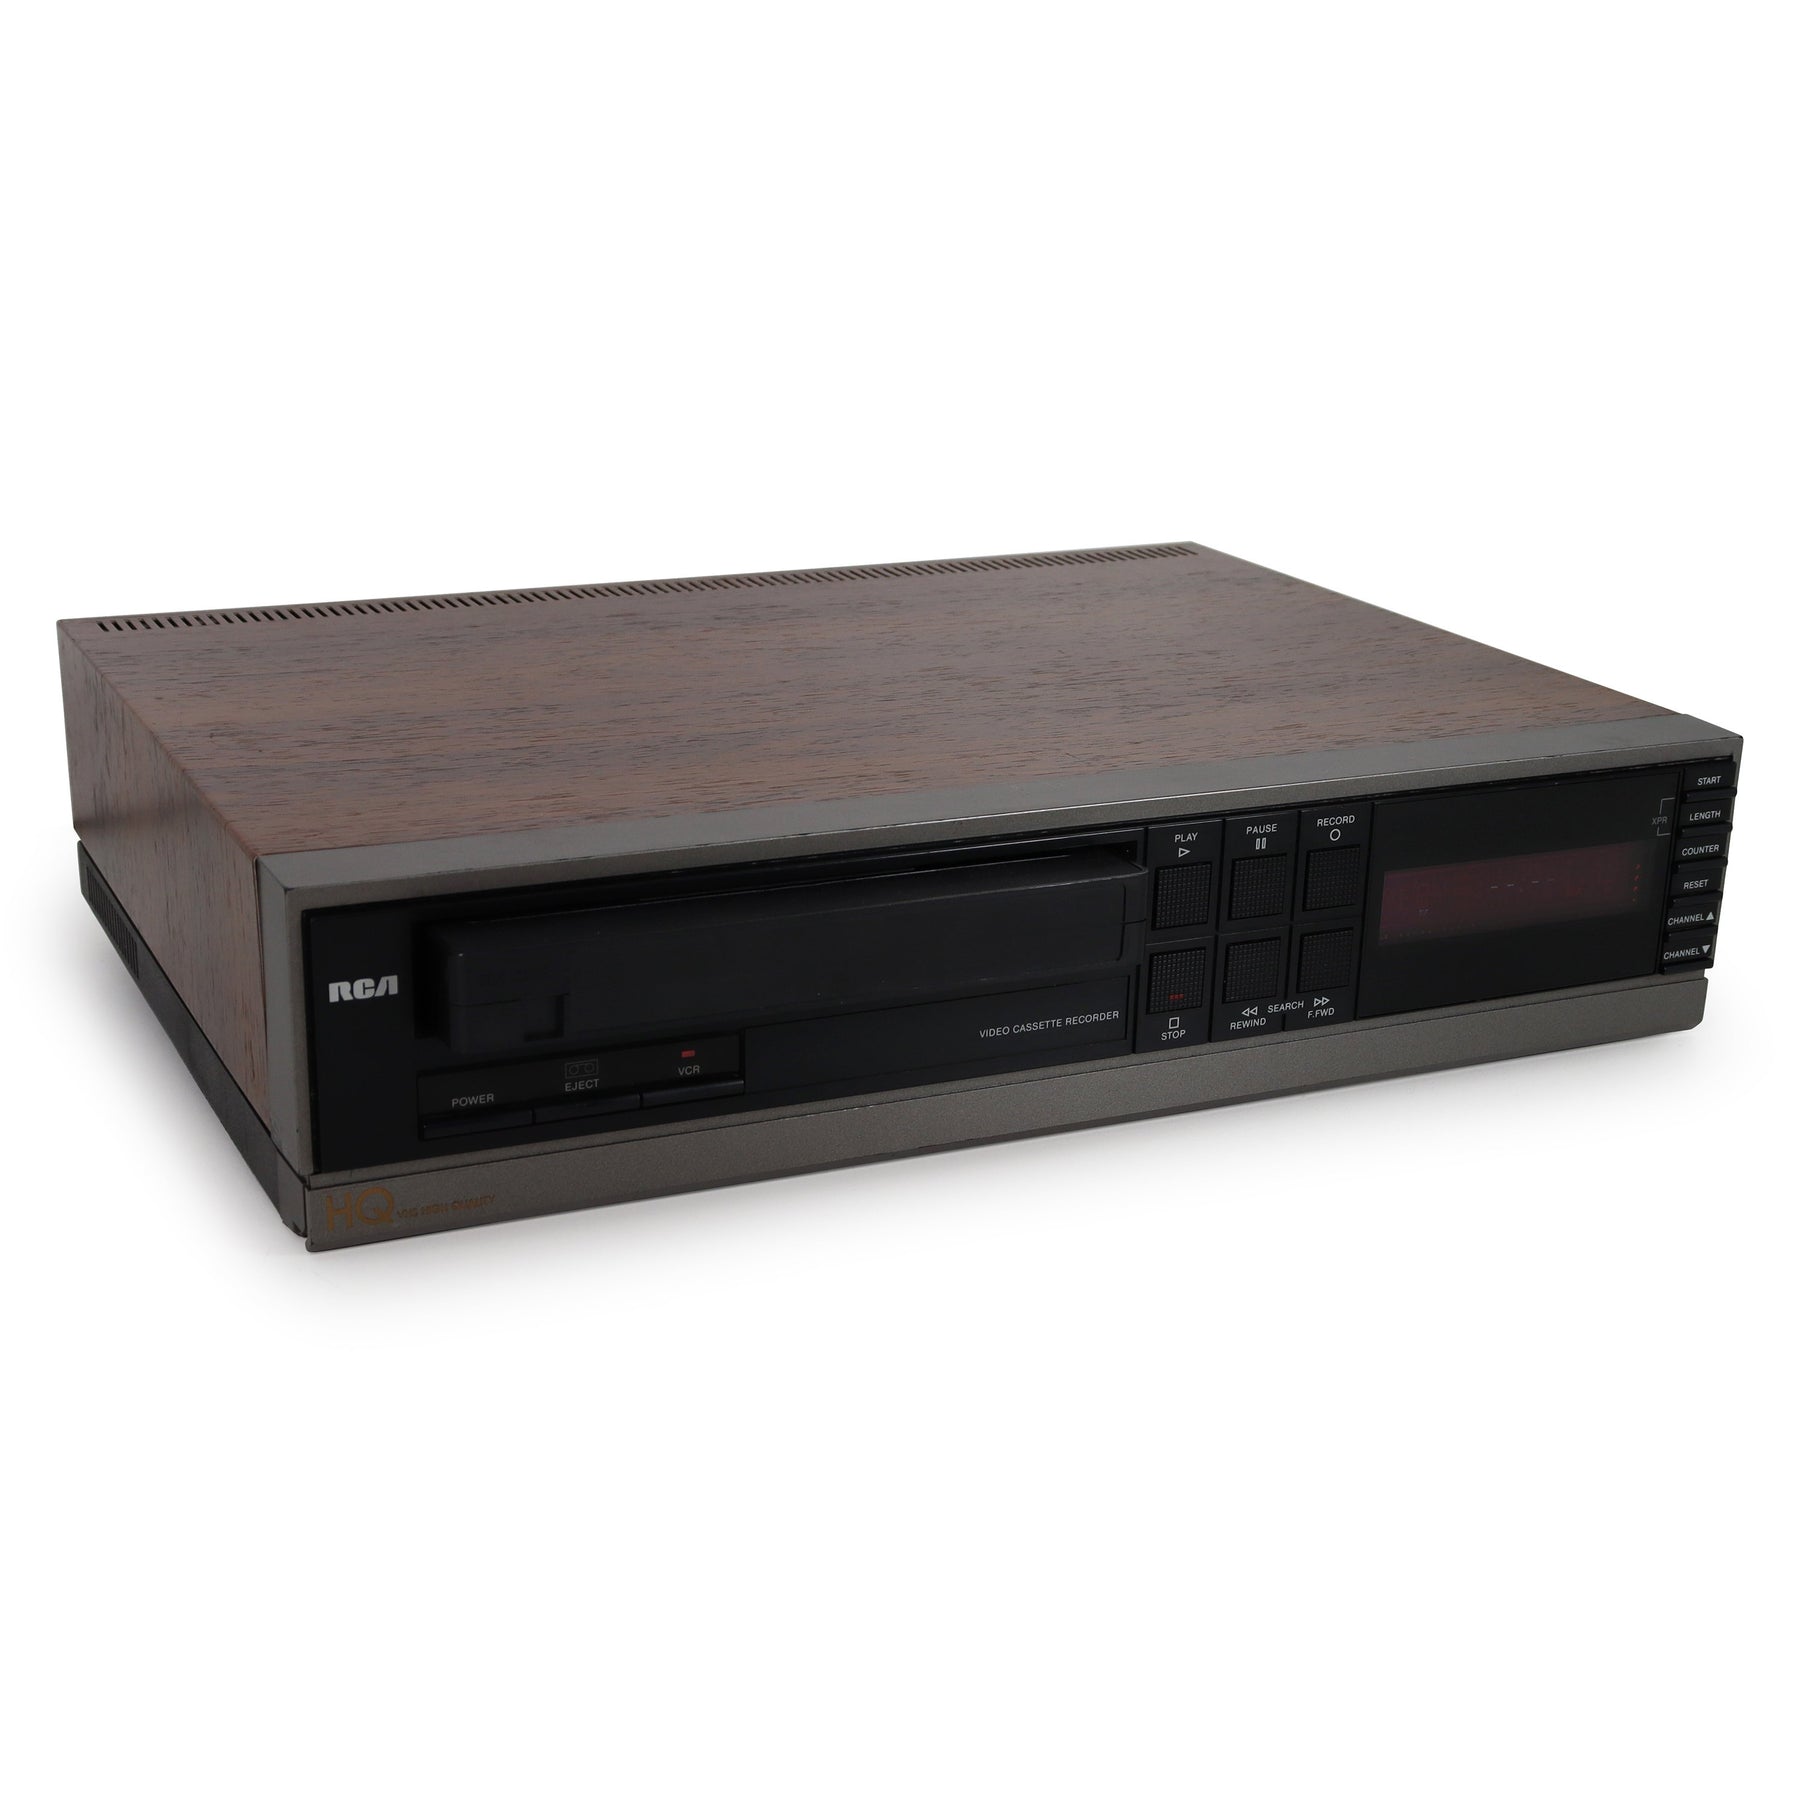 Trying to find a VCR? We've got them!